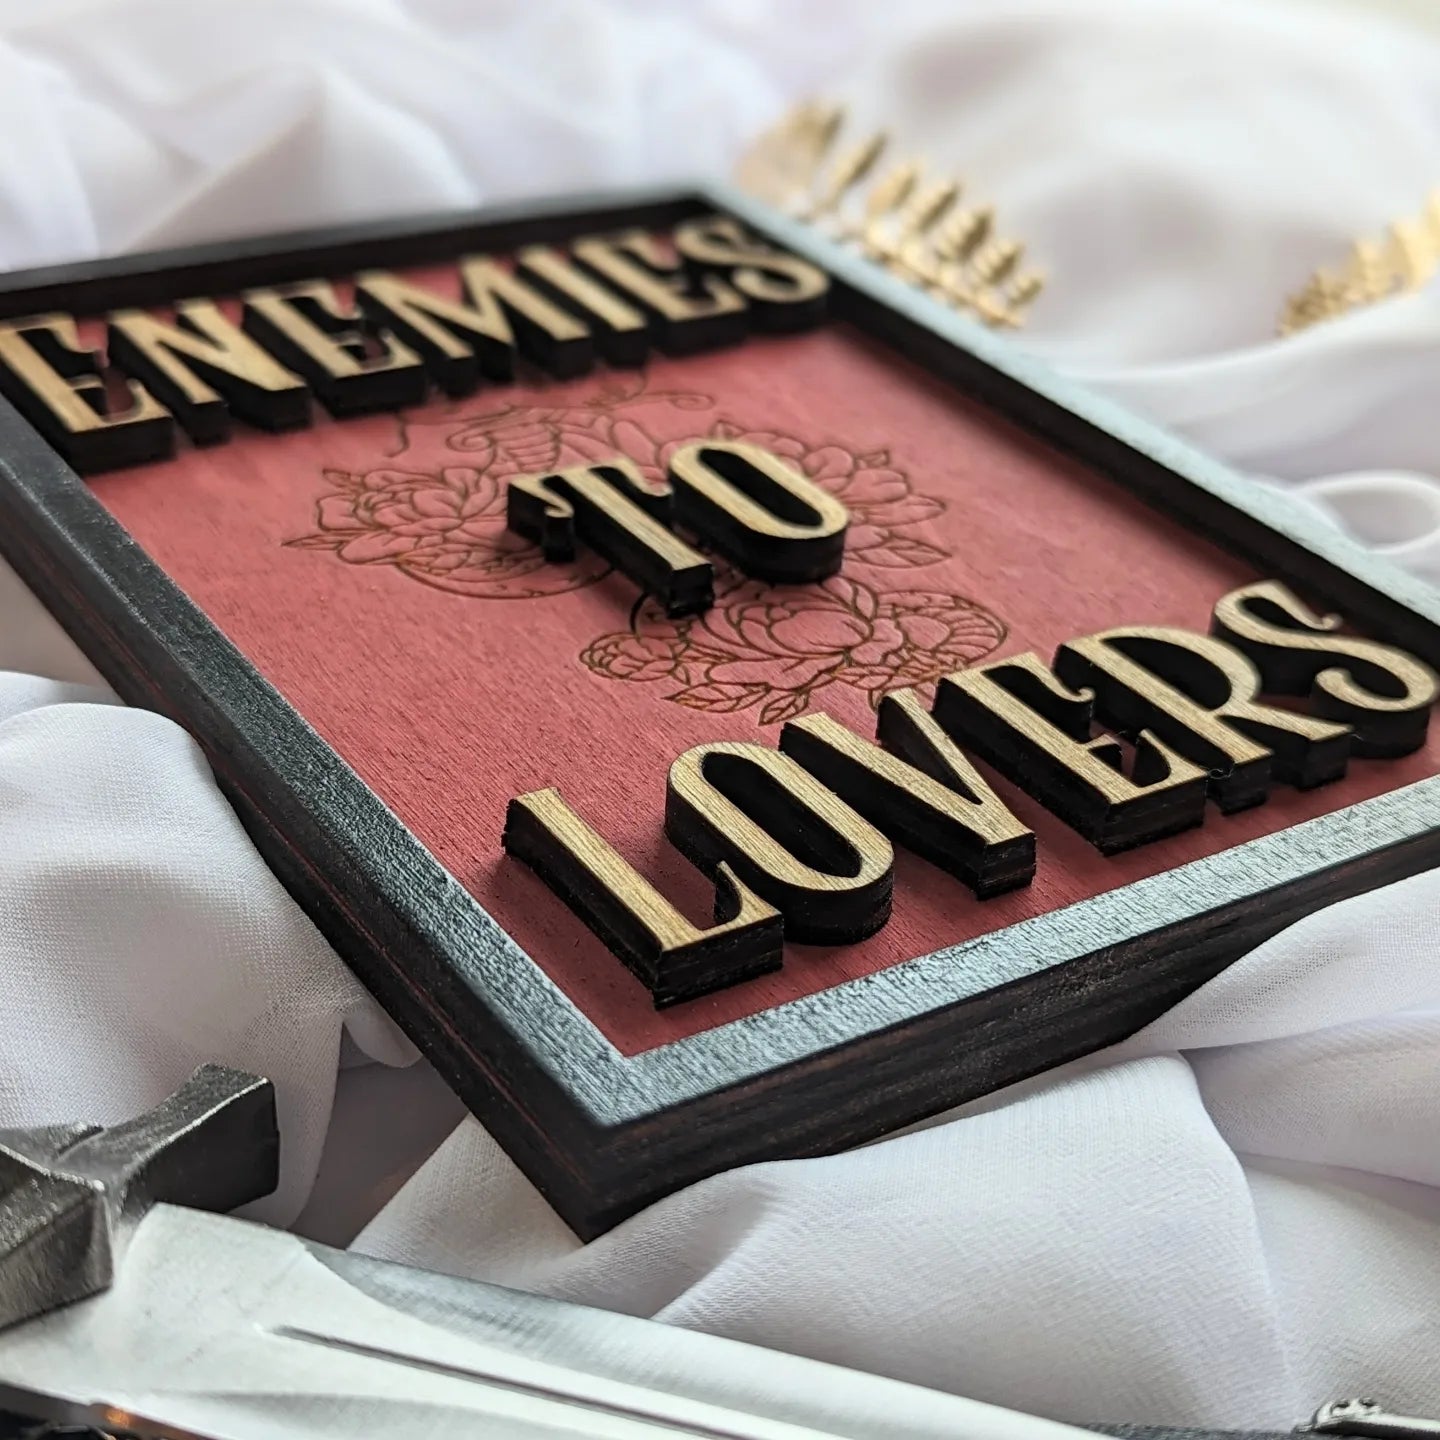 Enemies to Lovers | Wooden Bookshelf Sign - Quill & Cauldron